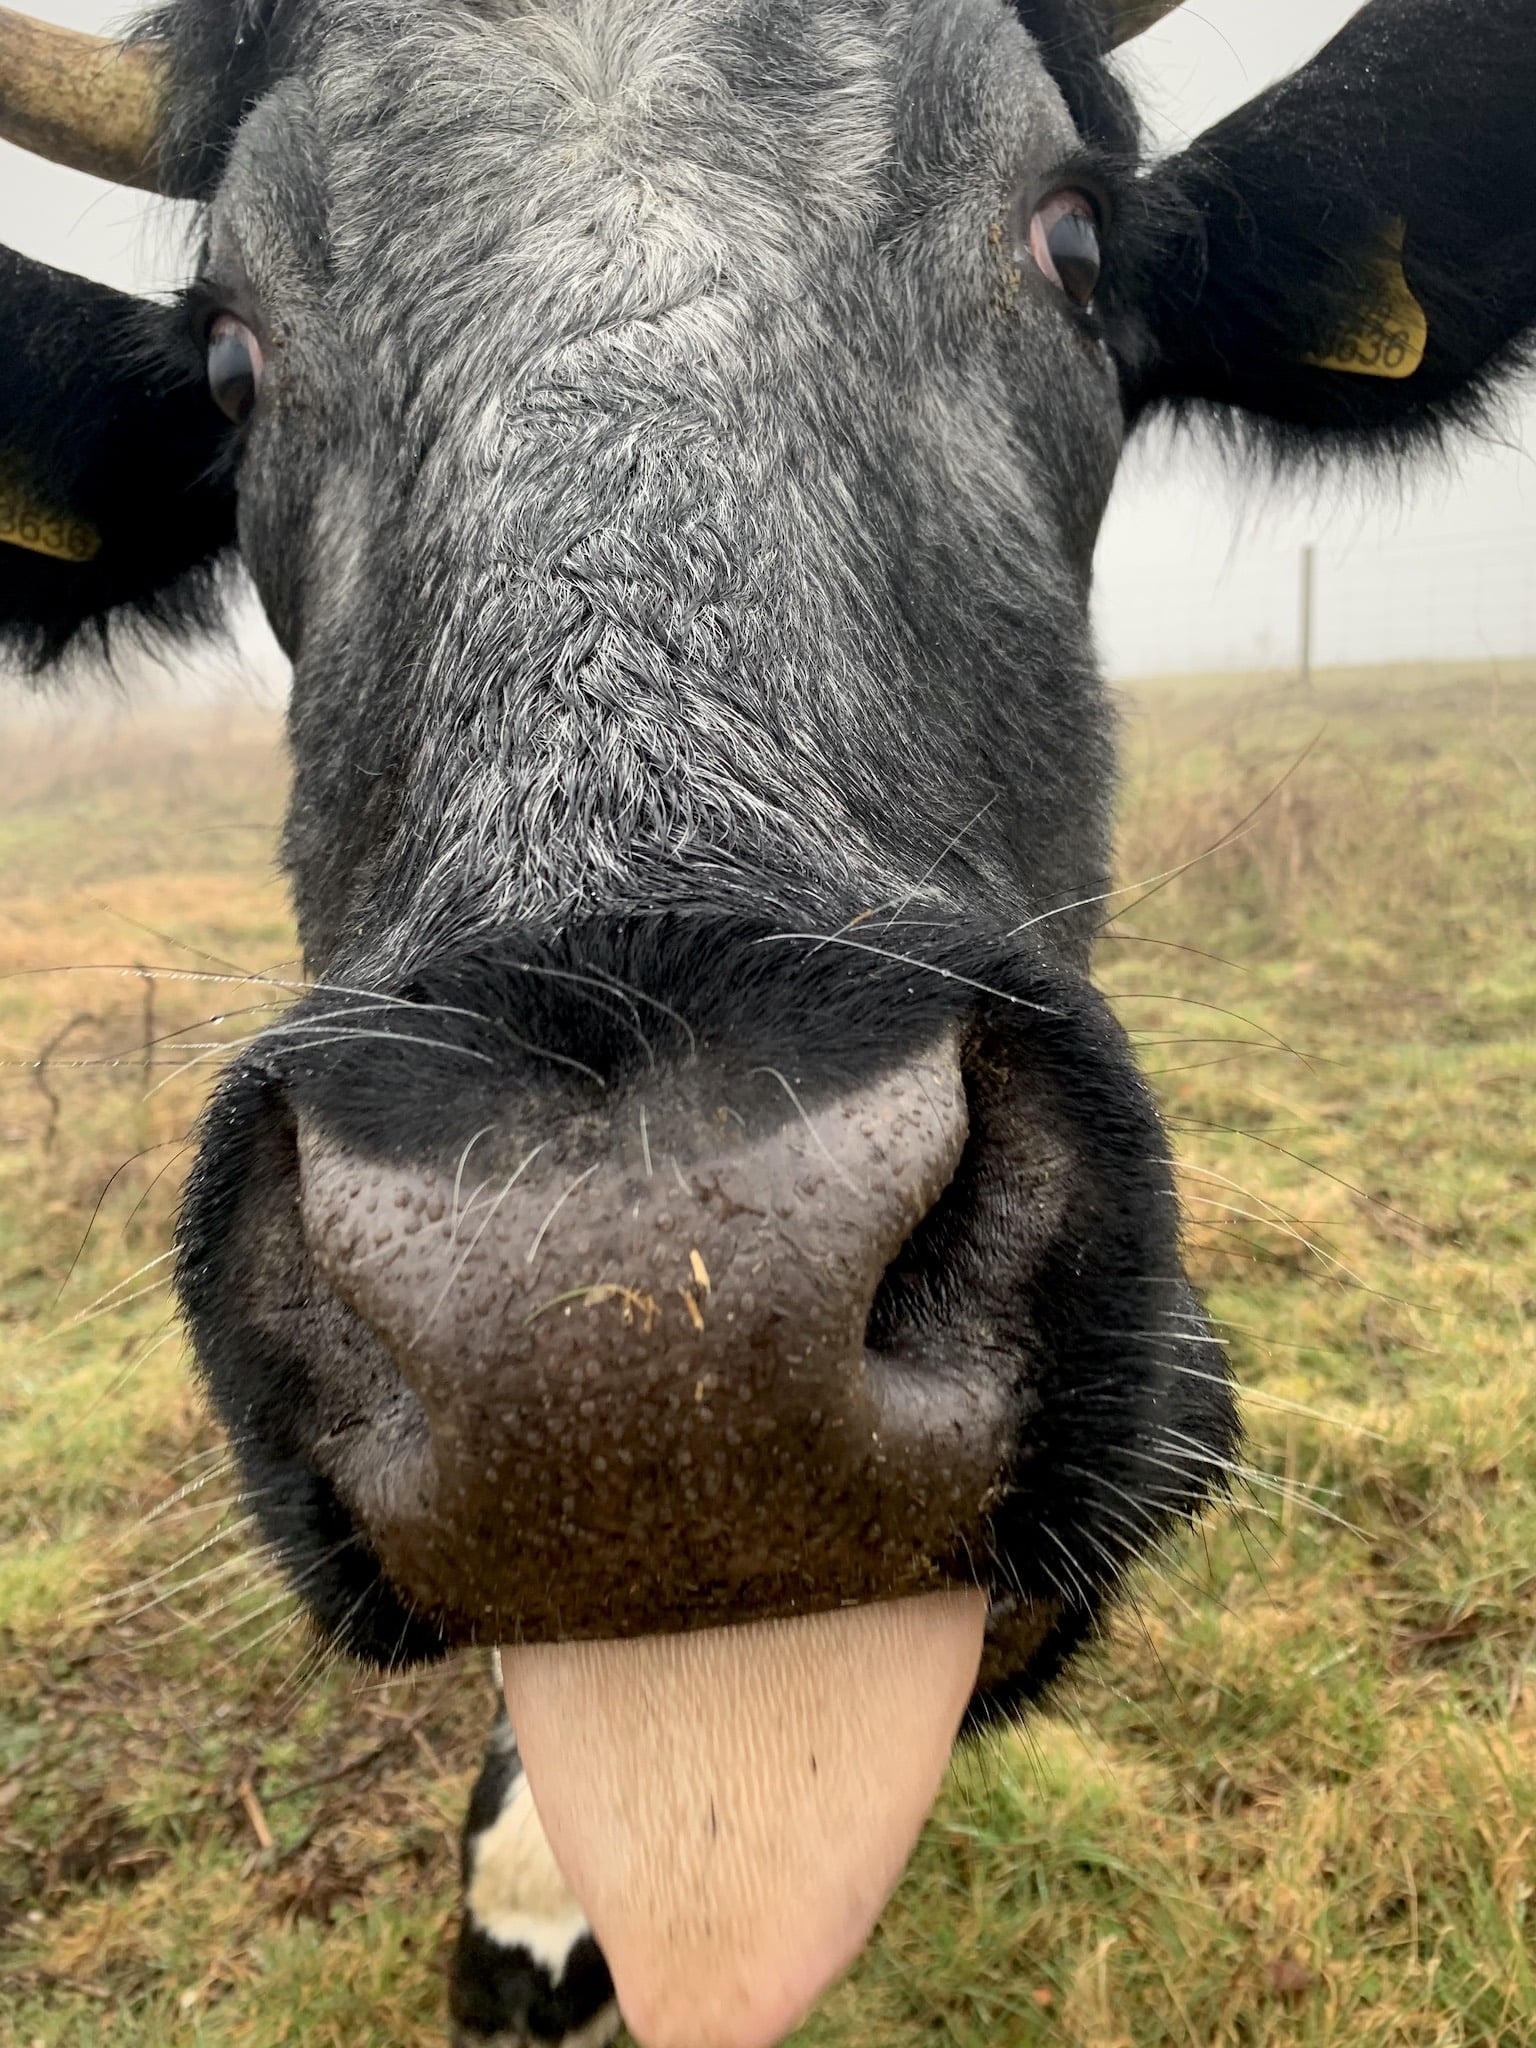 A closeup of a cow with the tongue out in expectation of food